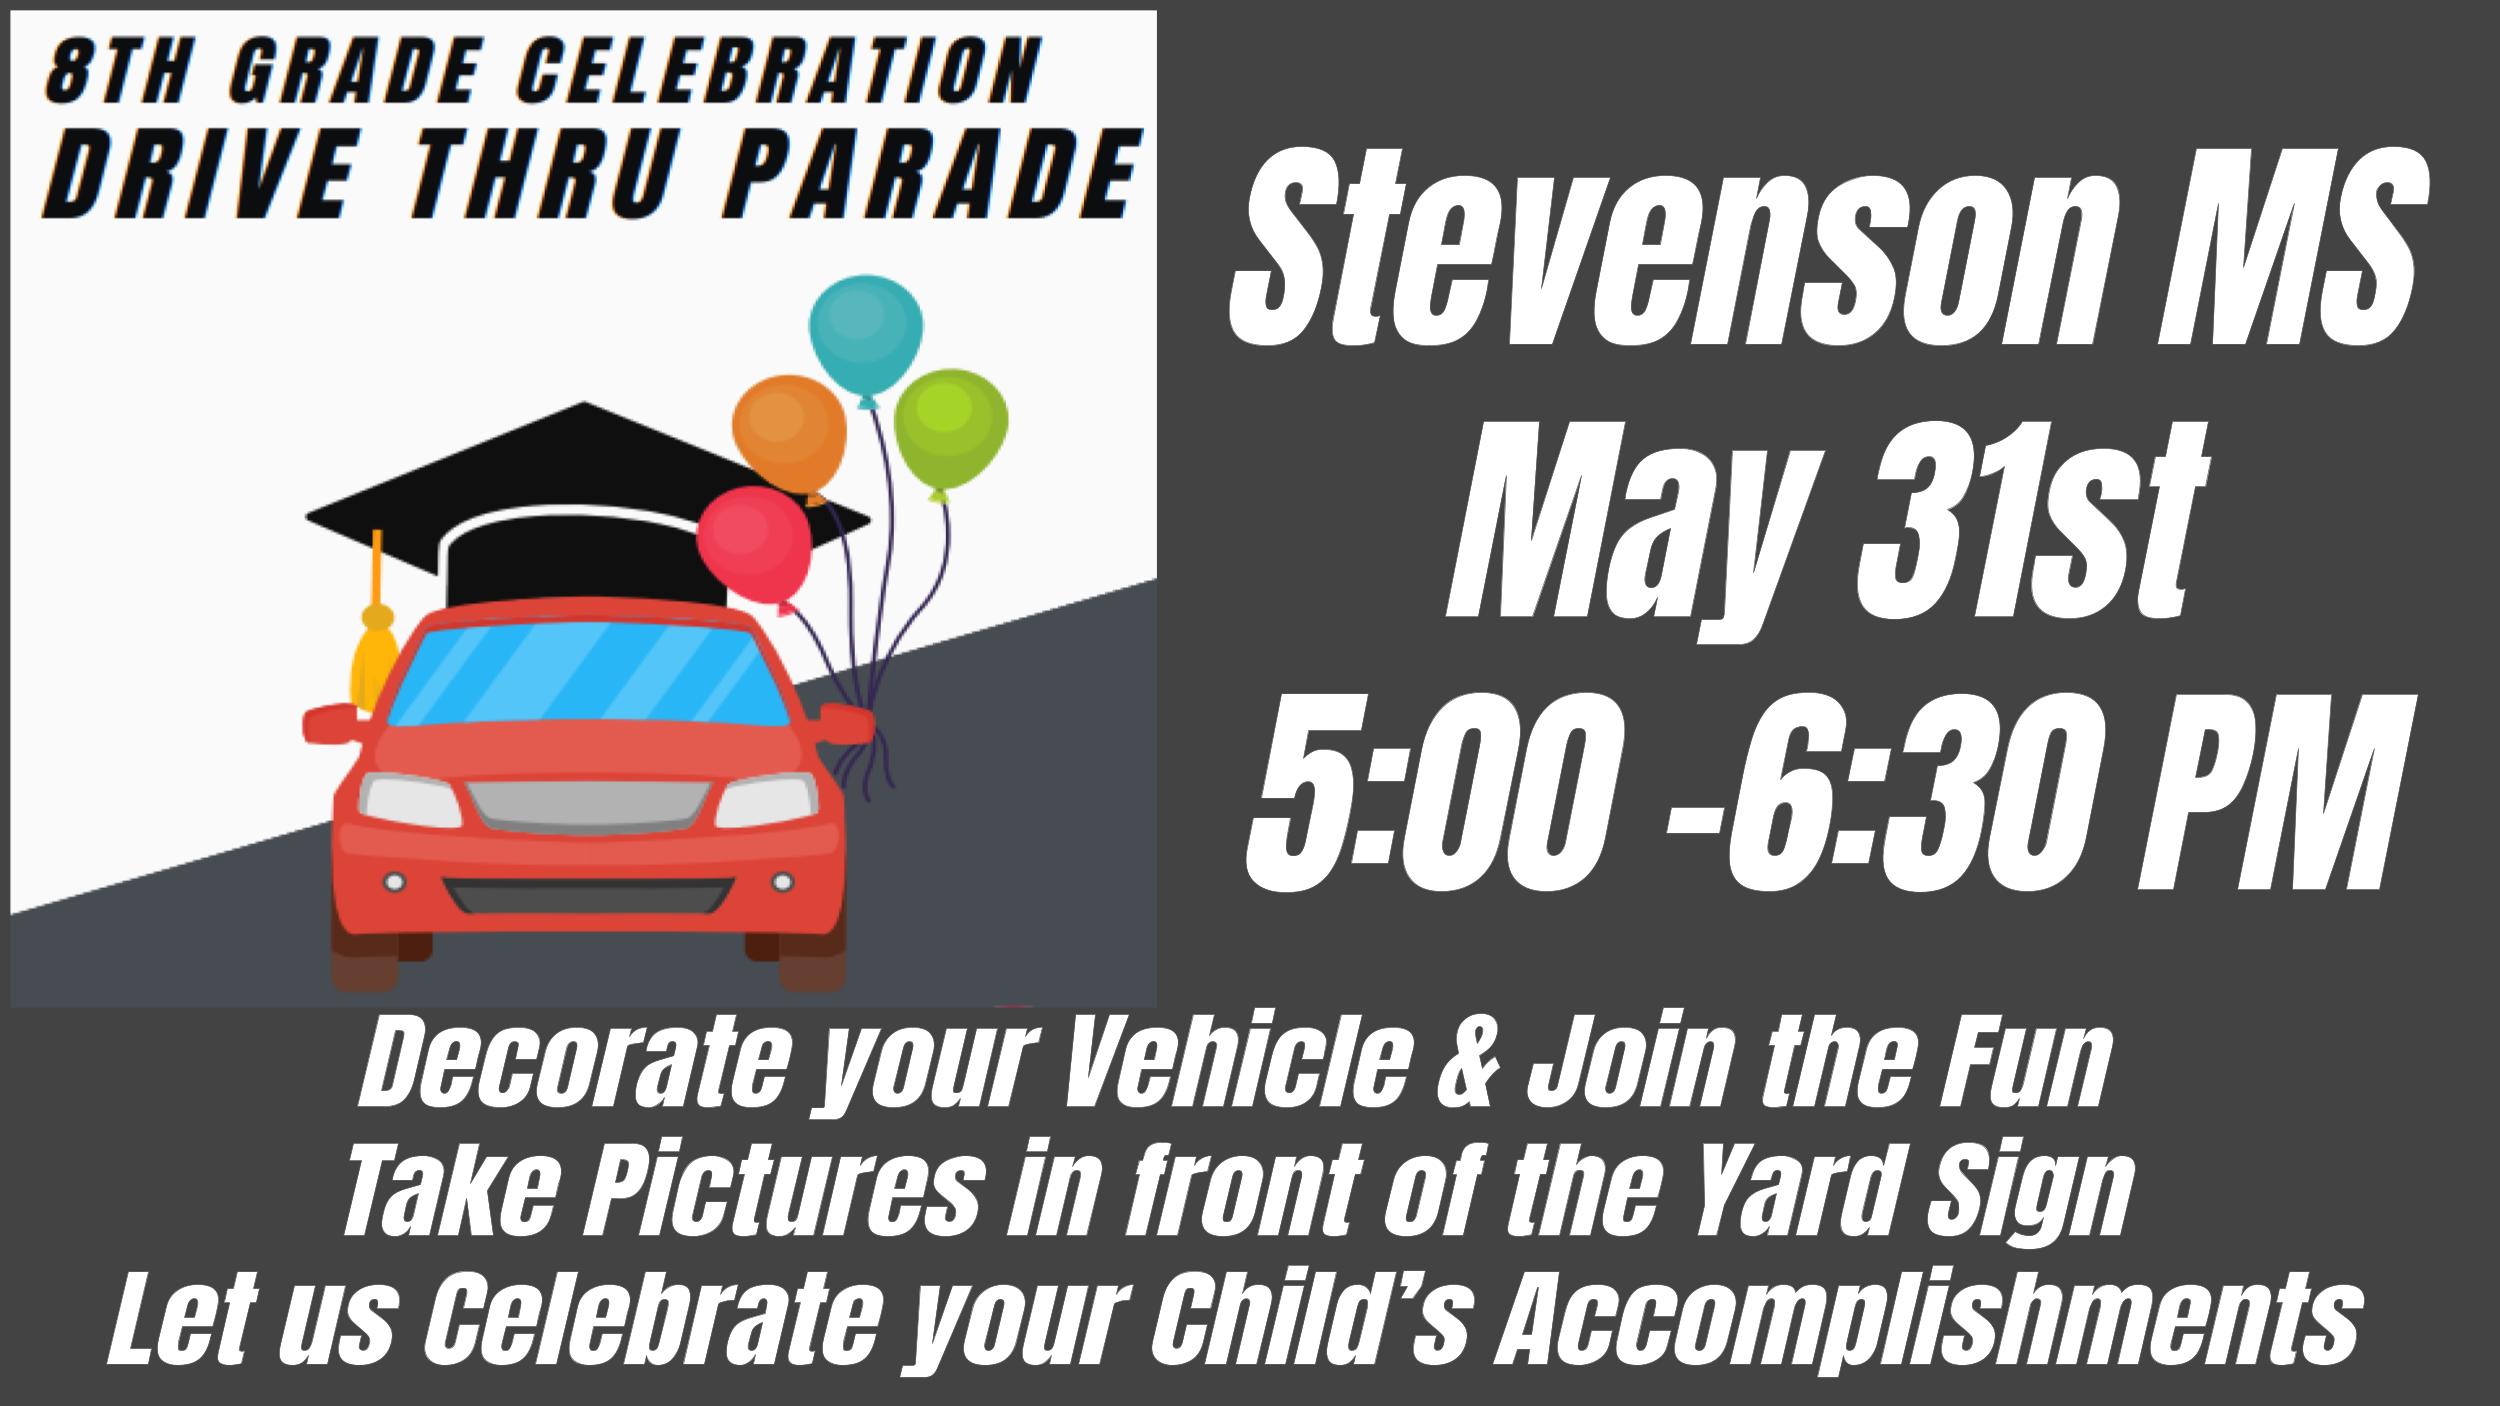 8th Grade Celebration Drive Thru Parade on May 31, 2024 from 5-6:30 pm.